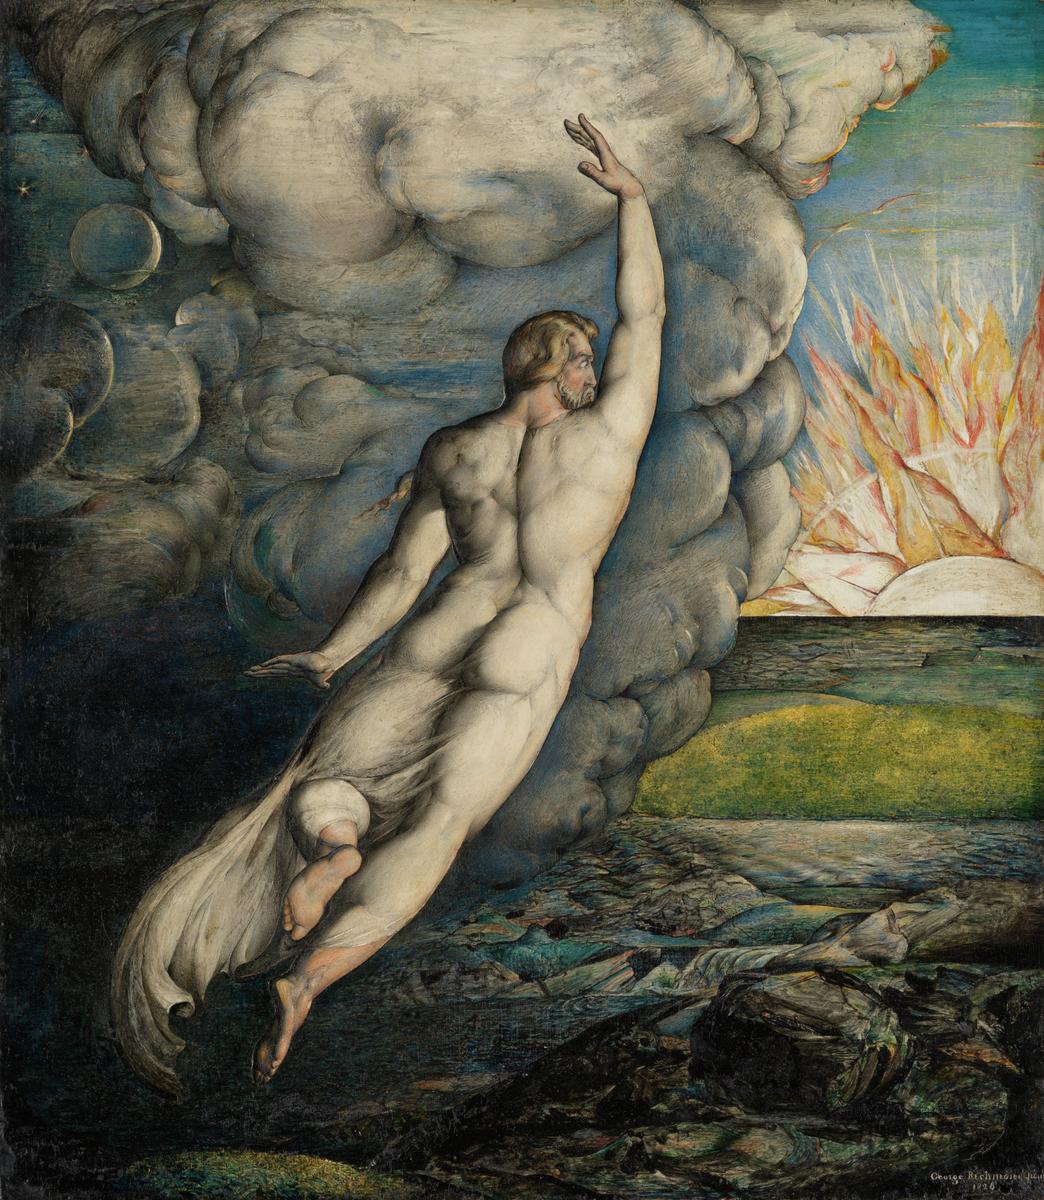 Painter Of The Night 119 The Creation of Light', George Richmond, 1826 | Tate